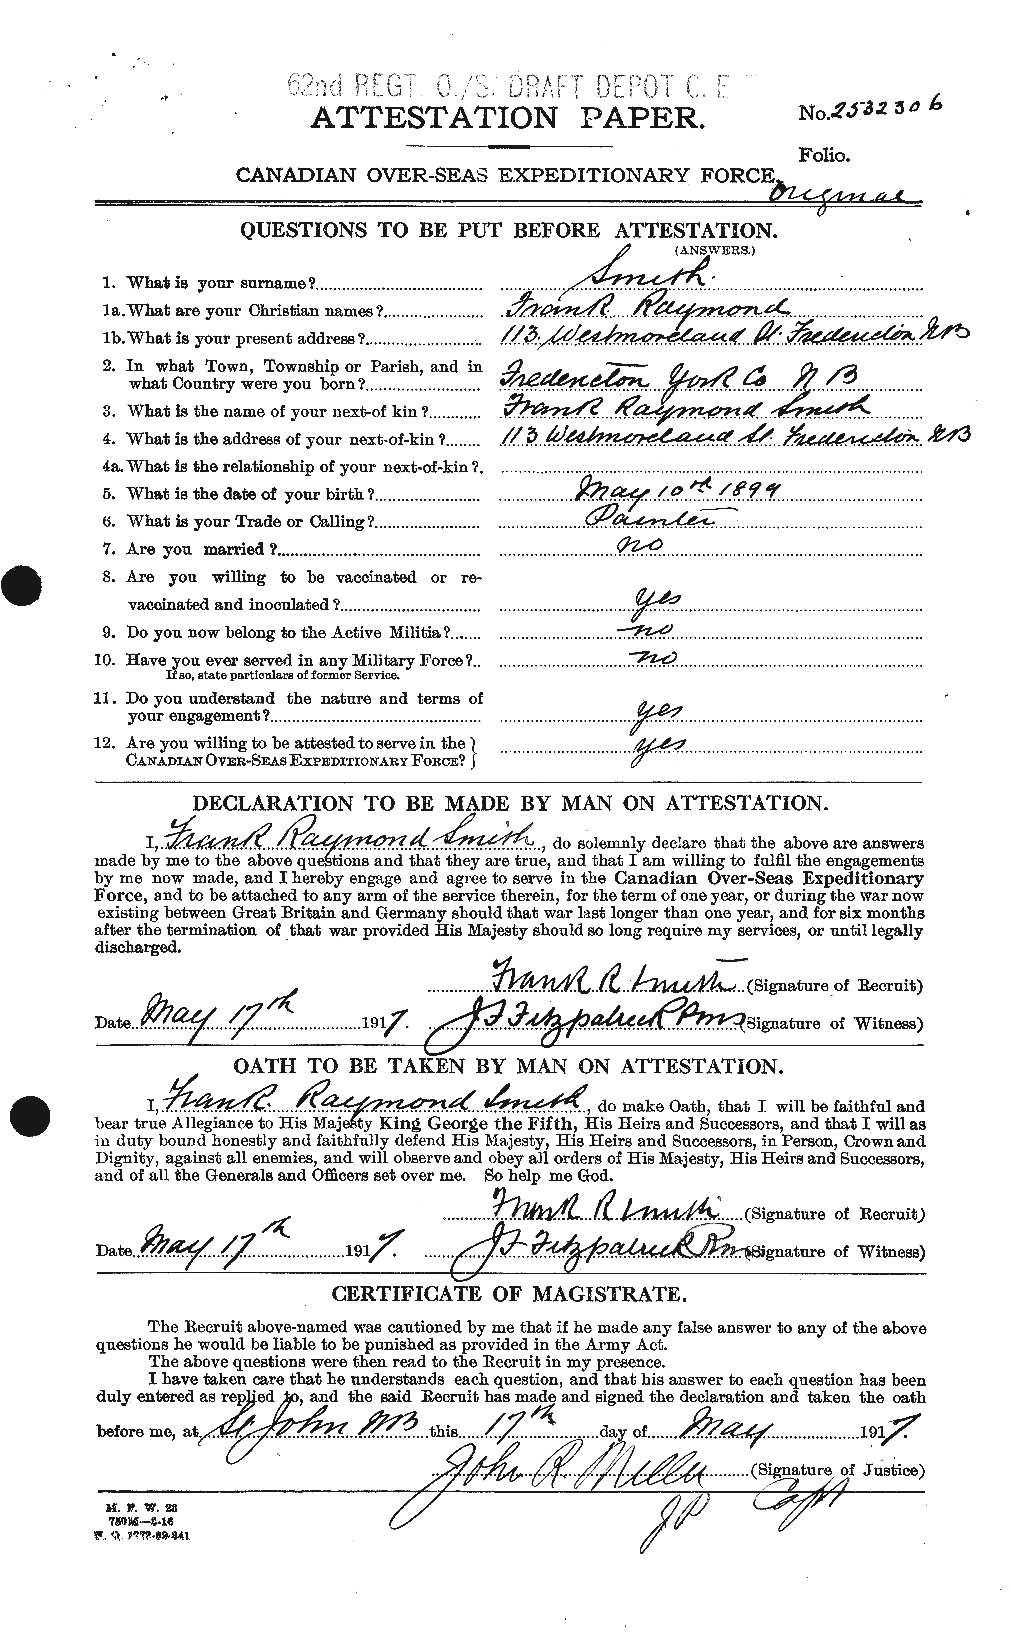 Personnel Records of the First World War - CEF 106571a